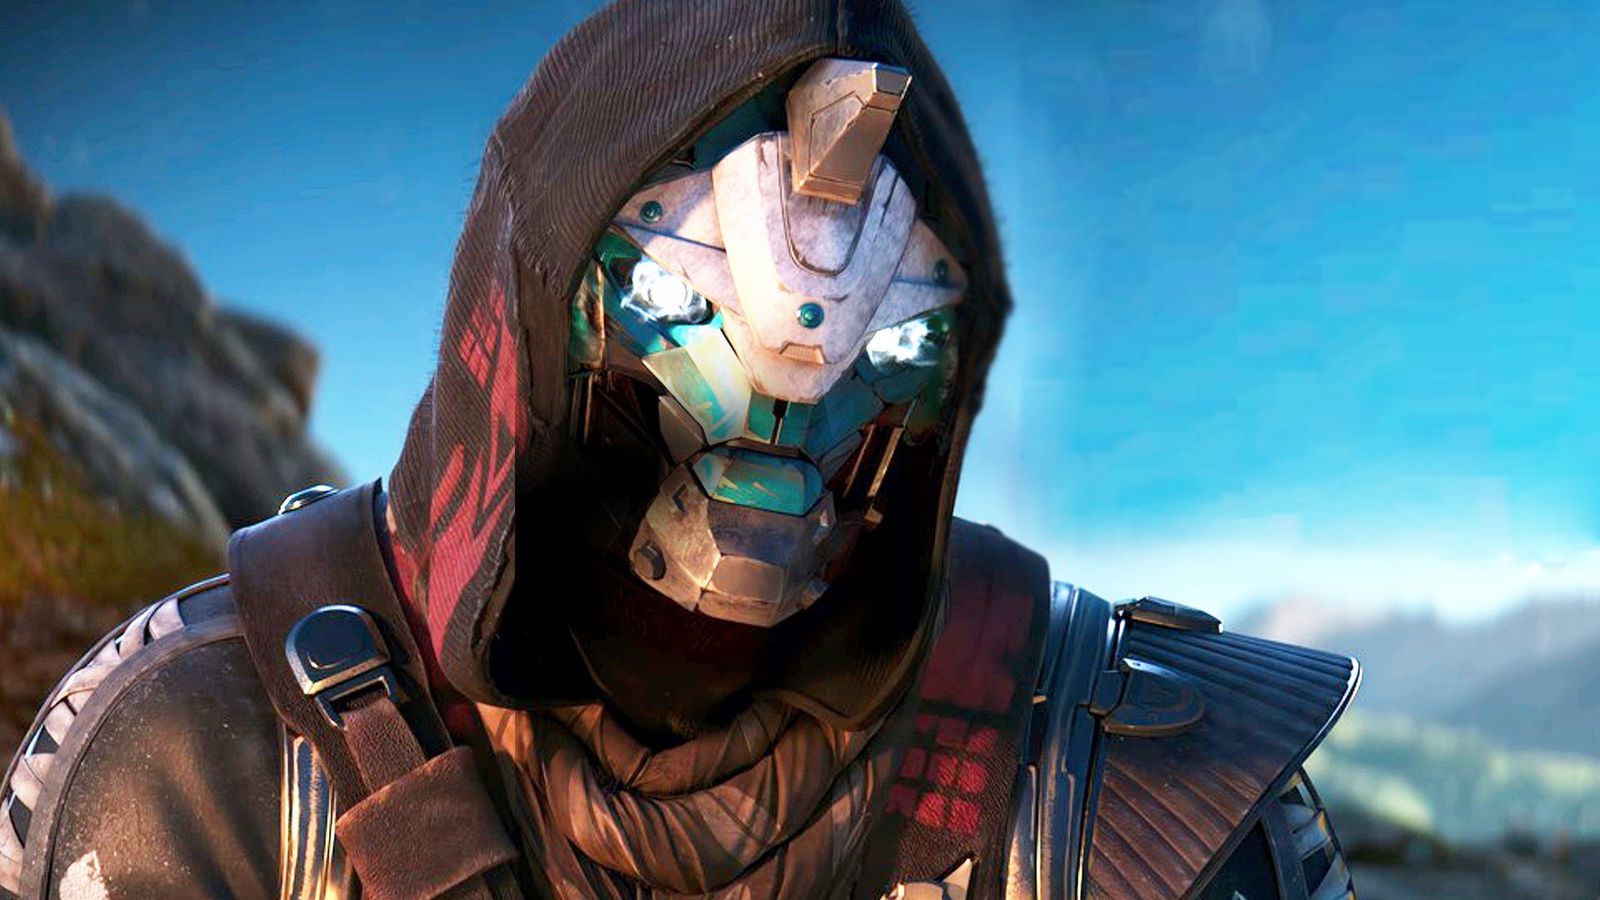 Destiny 2 offline play revealed - a portrait of Guardian Cayde-6 looking down focus 